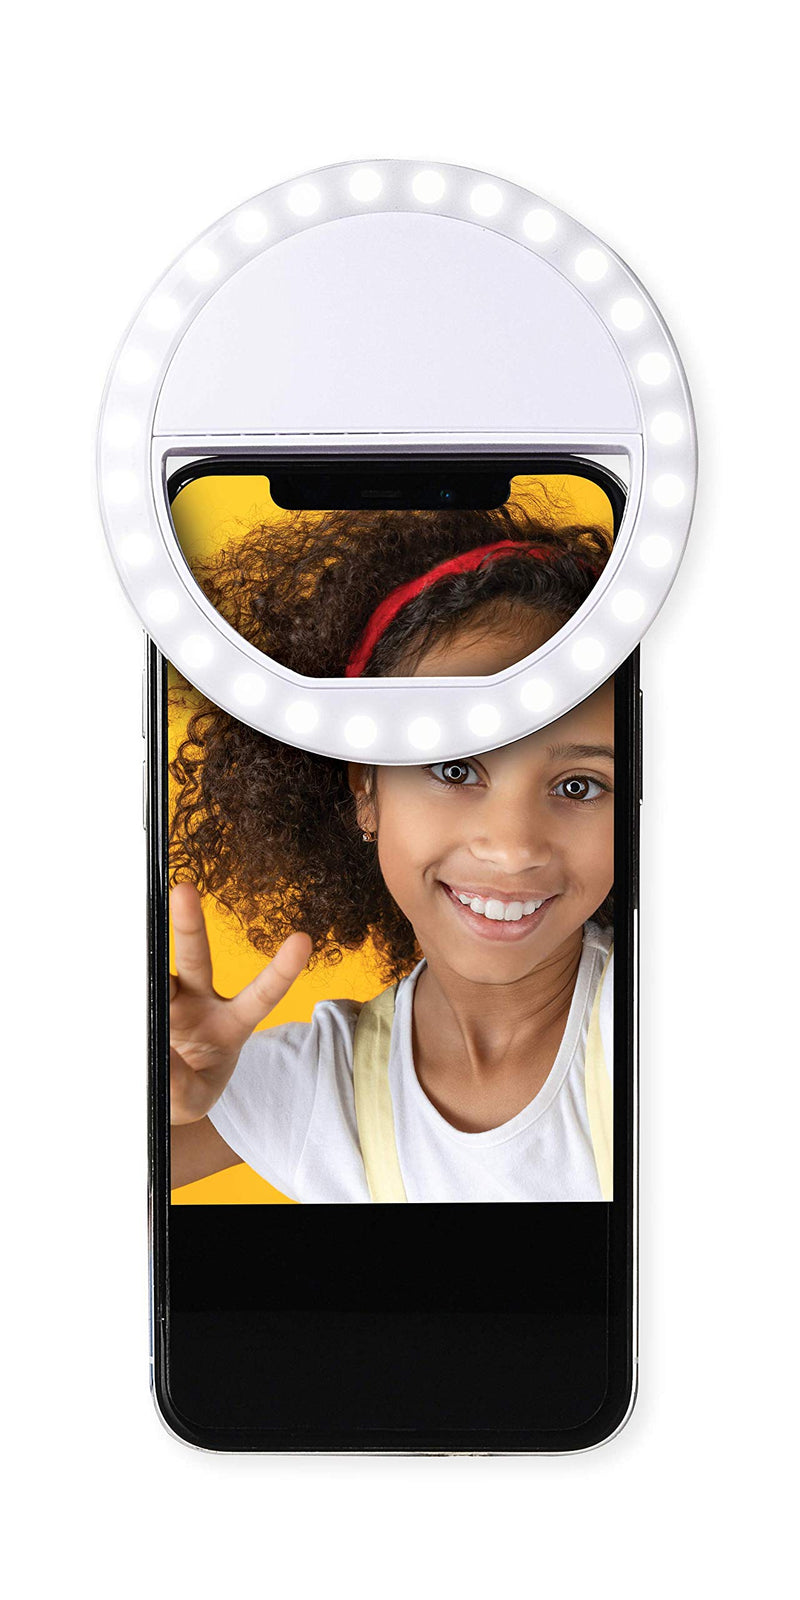  [AUSTRALIA] - Portable Selfie Ring Light Clip - from Jensen. for Photo/Vlogging/Video Conferencing. 3 Levels of Brightness. Compatible with All Smart Phones, Tablets and Laptops - Rechargeable